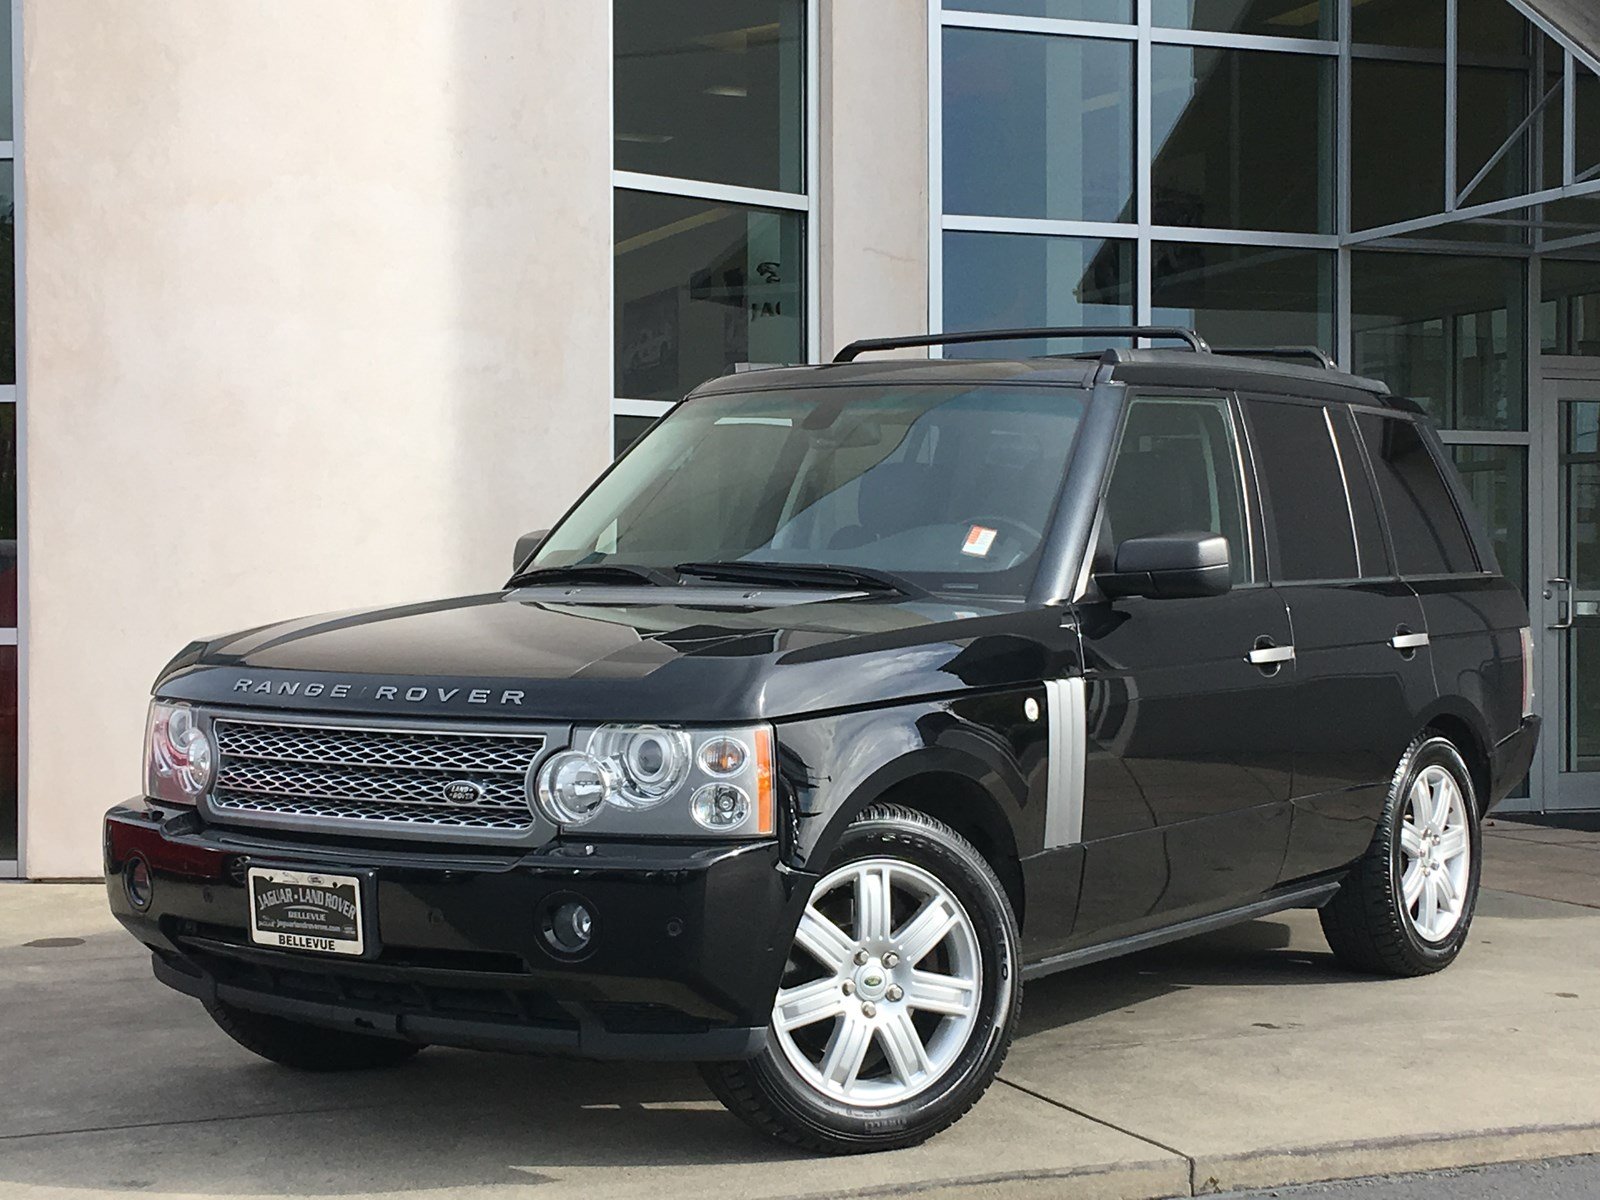 Pre-Owned 2008 Land Rover Range Rover HSE Sport Utility in Bellevue